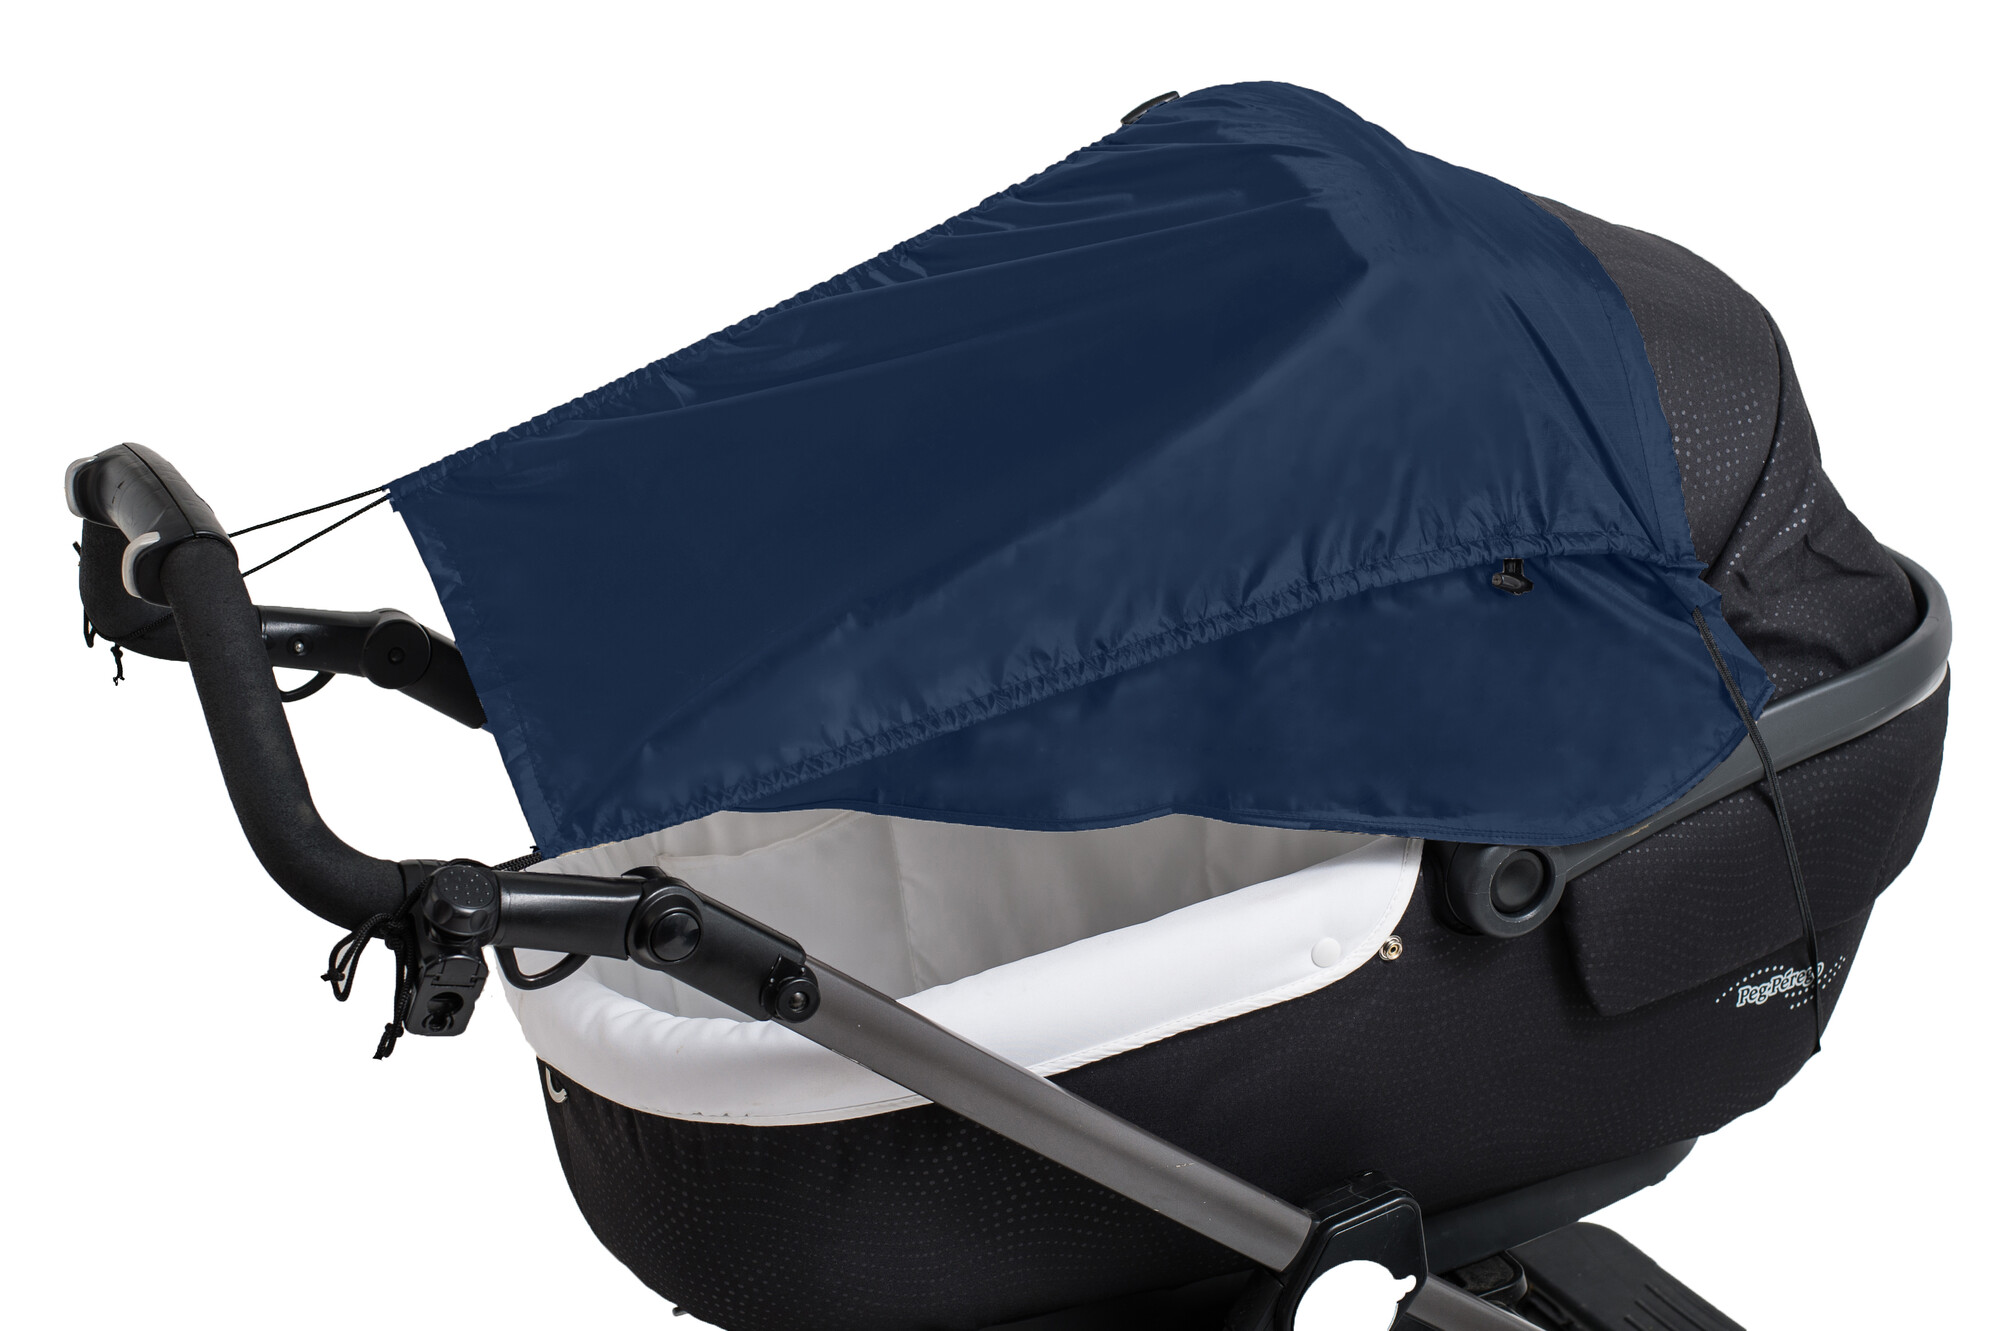 Altabebe - Universal UV sun screen with side protection for strollers - Navy Blue